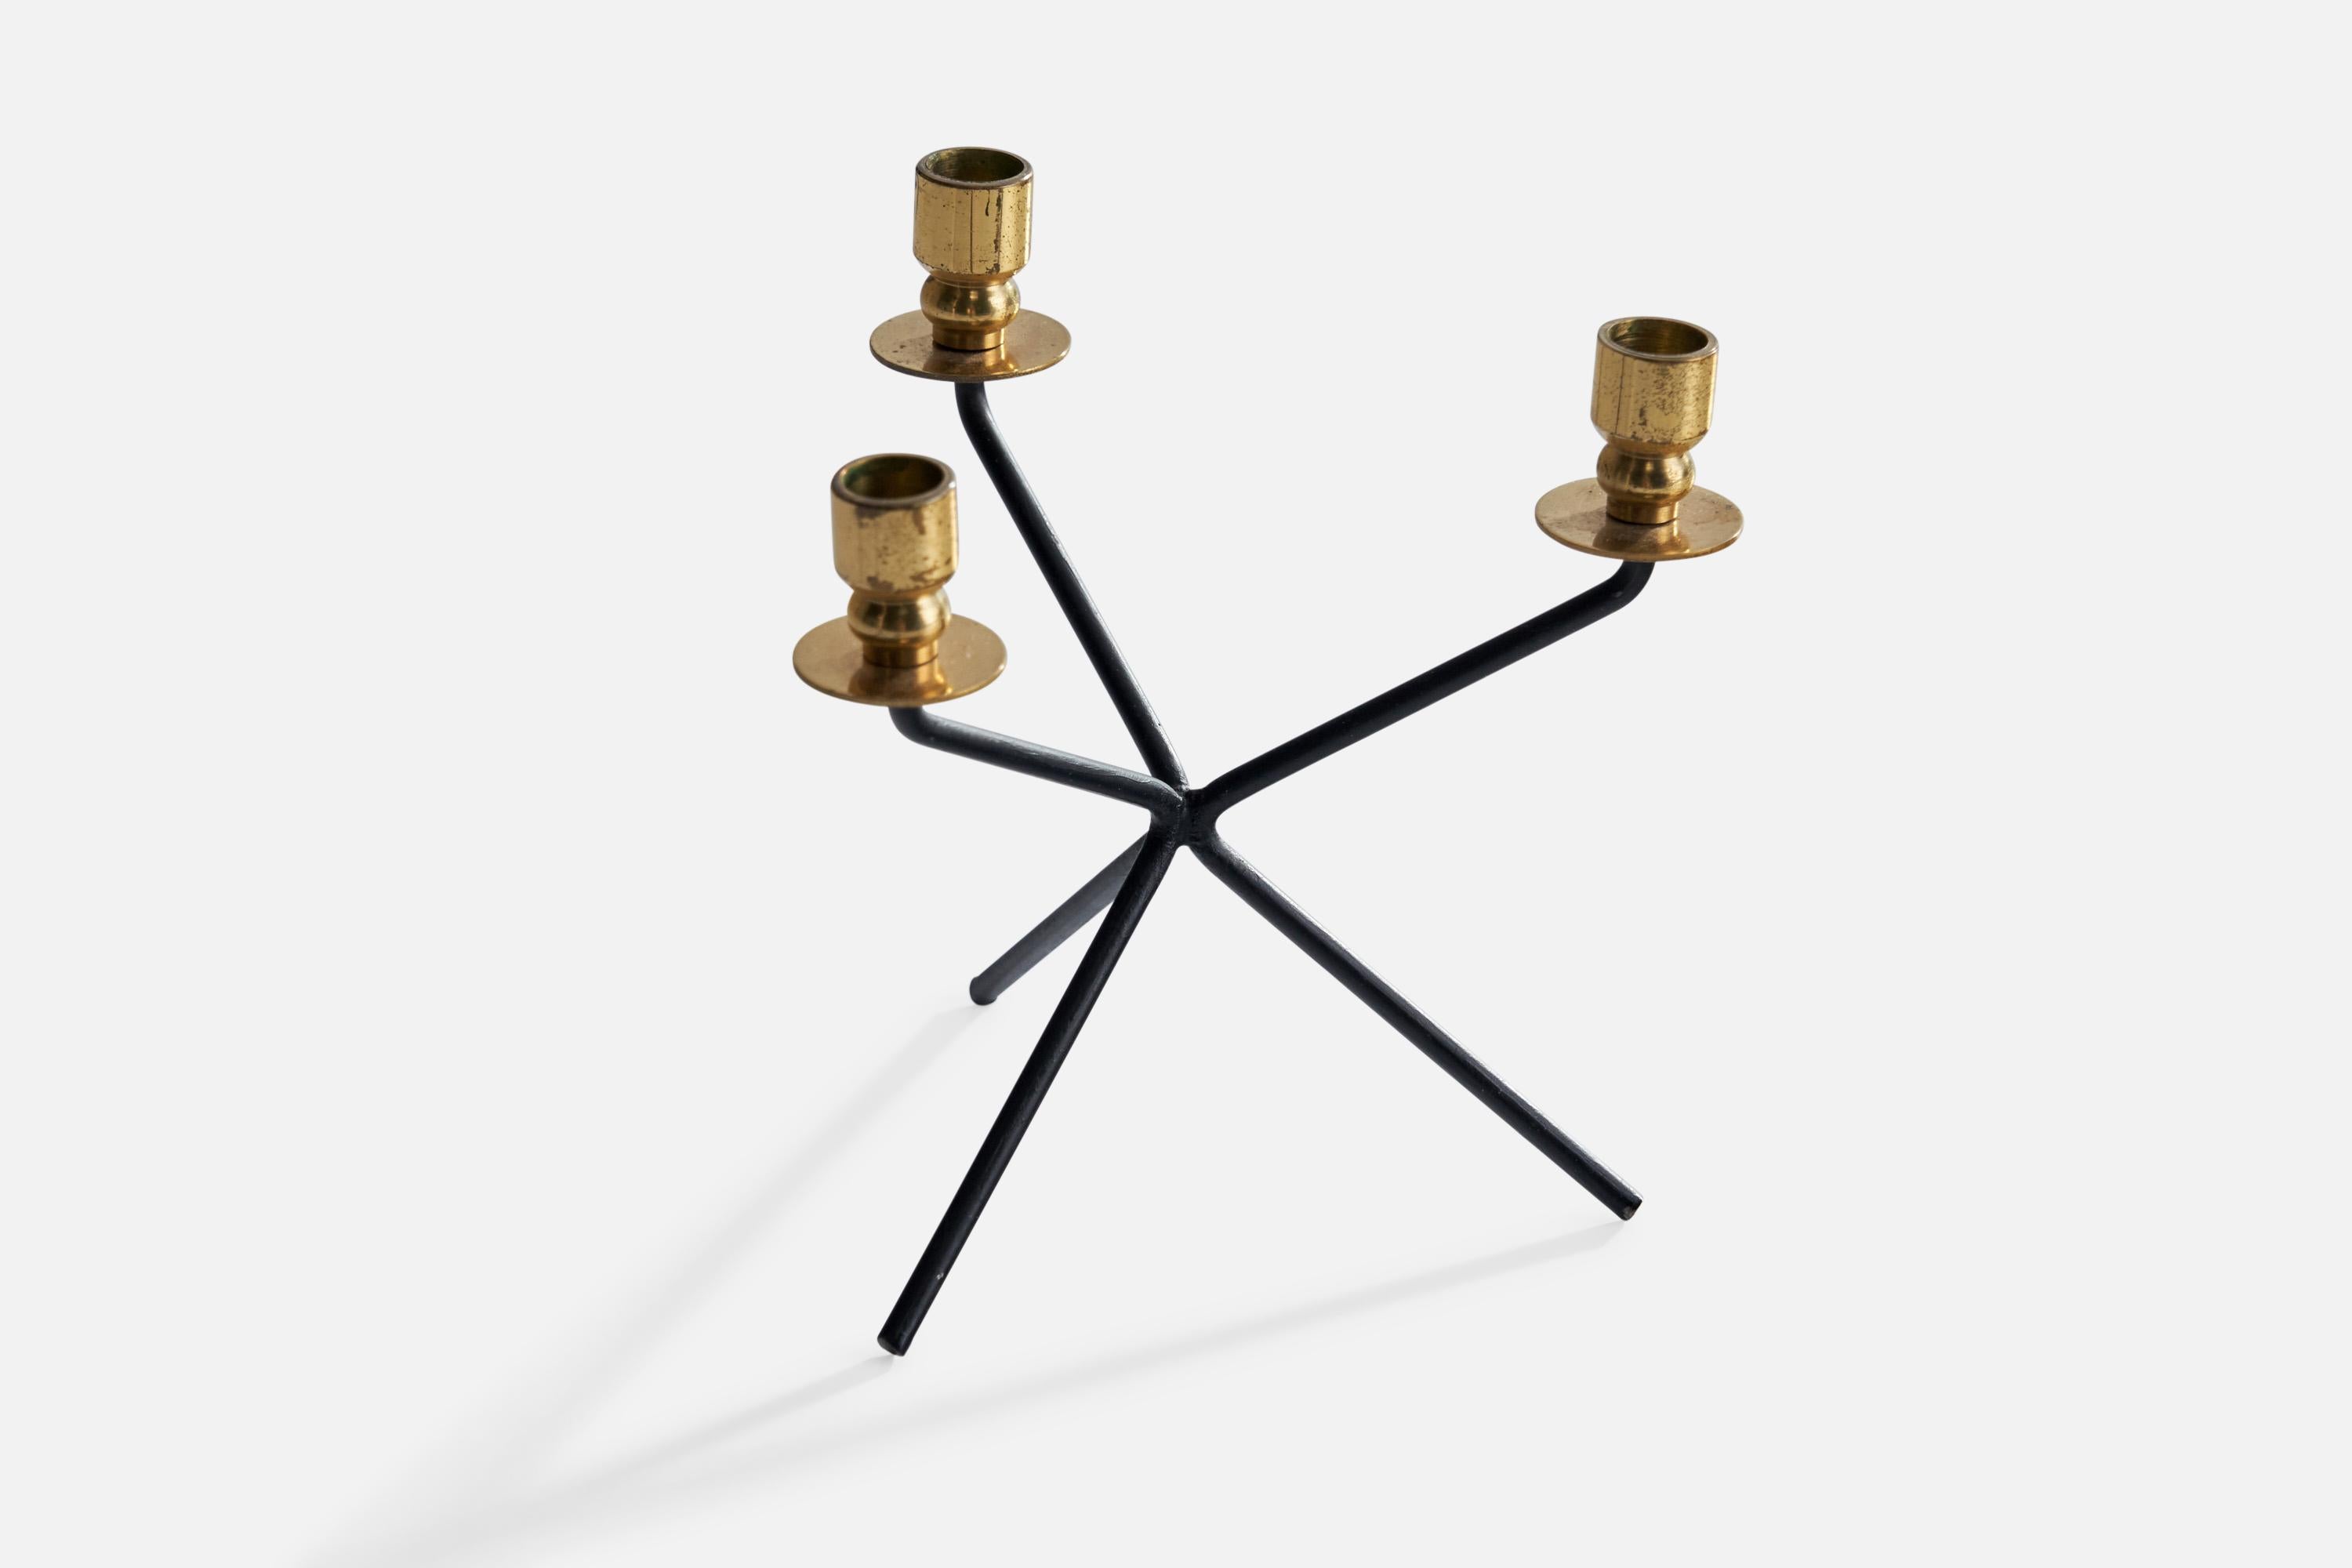 A small brass and black-painted metal chandelier designed and produced in Sweden, c. 1940s.

Uses .4” candles.